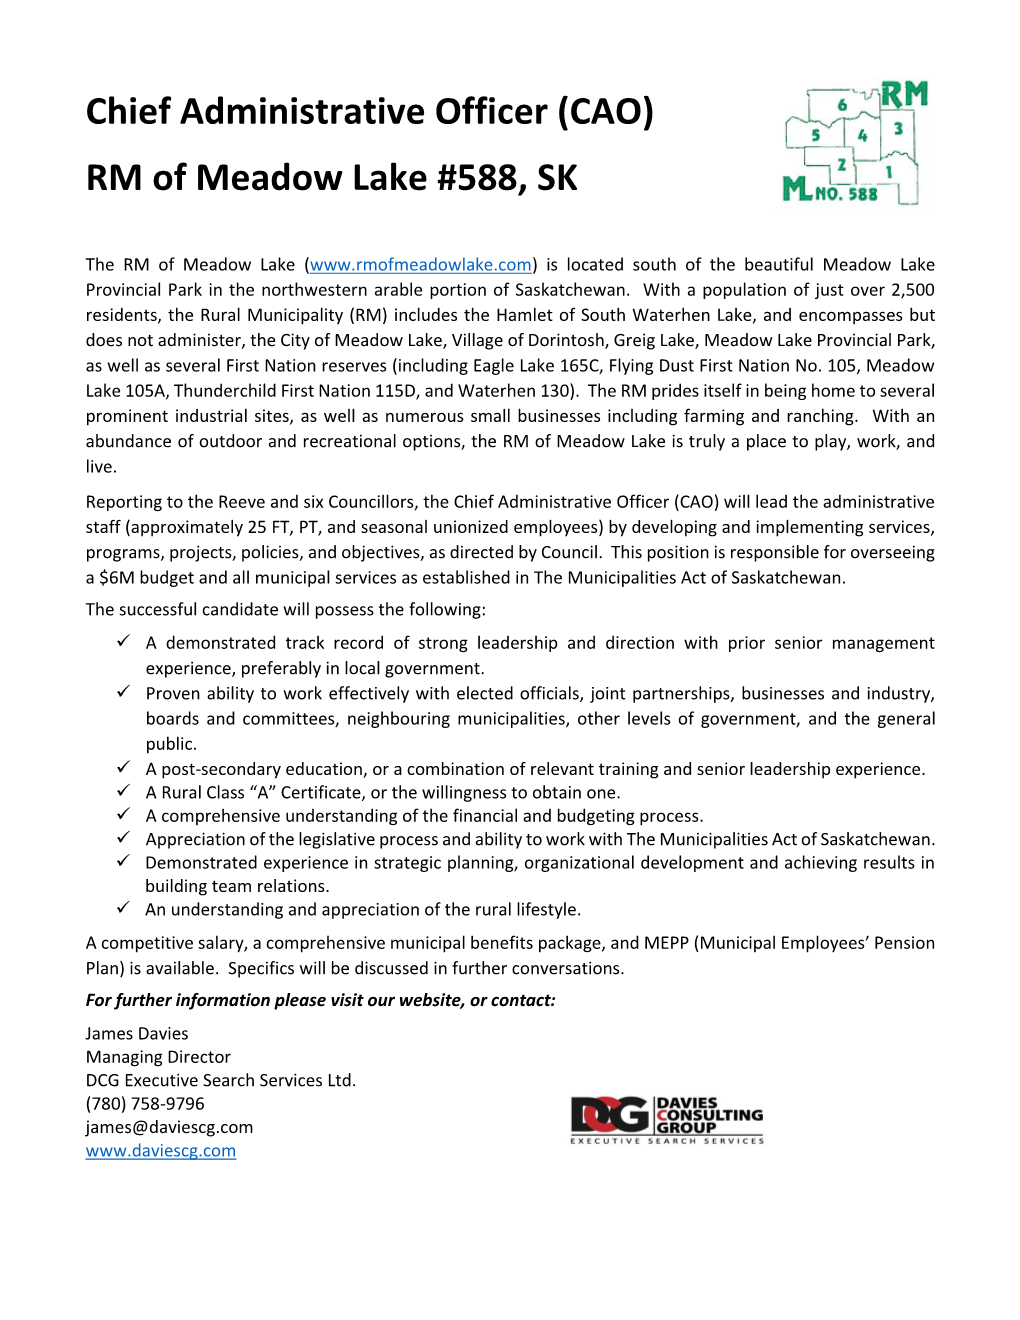 Chief Administrative Officer (CAO) RM of Meadow Lake #588, SK